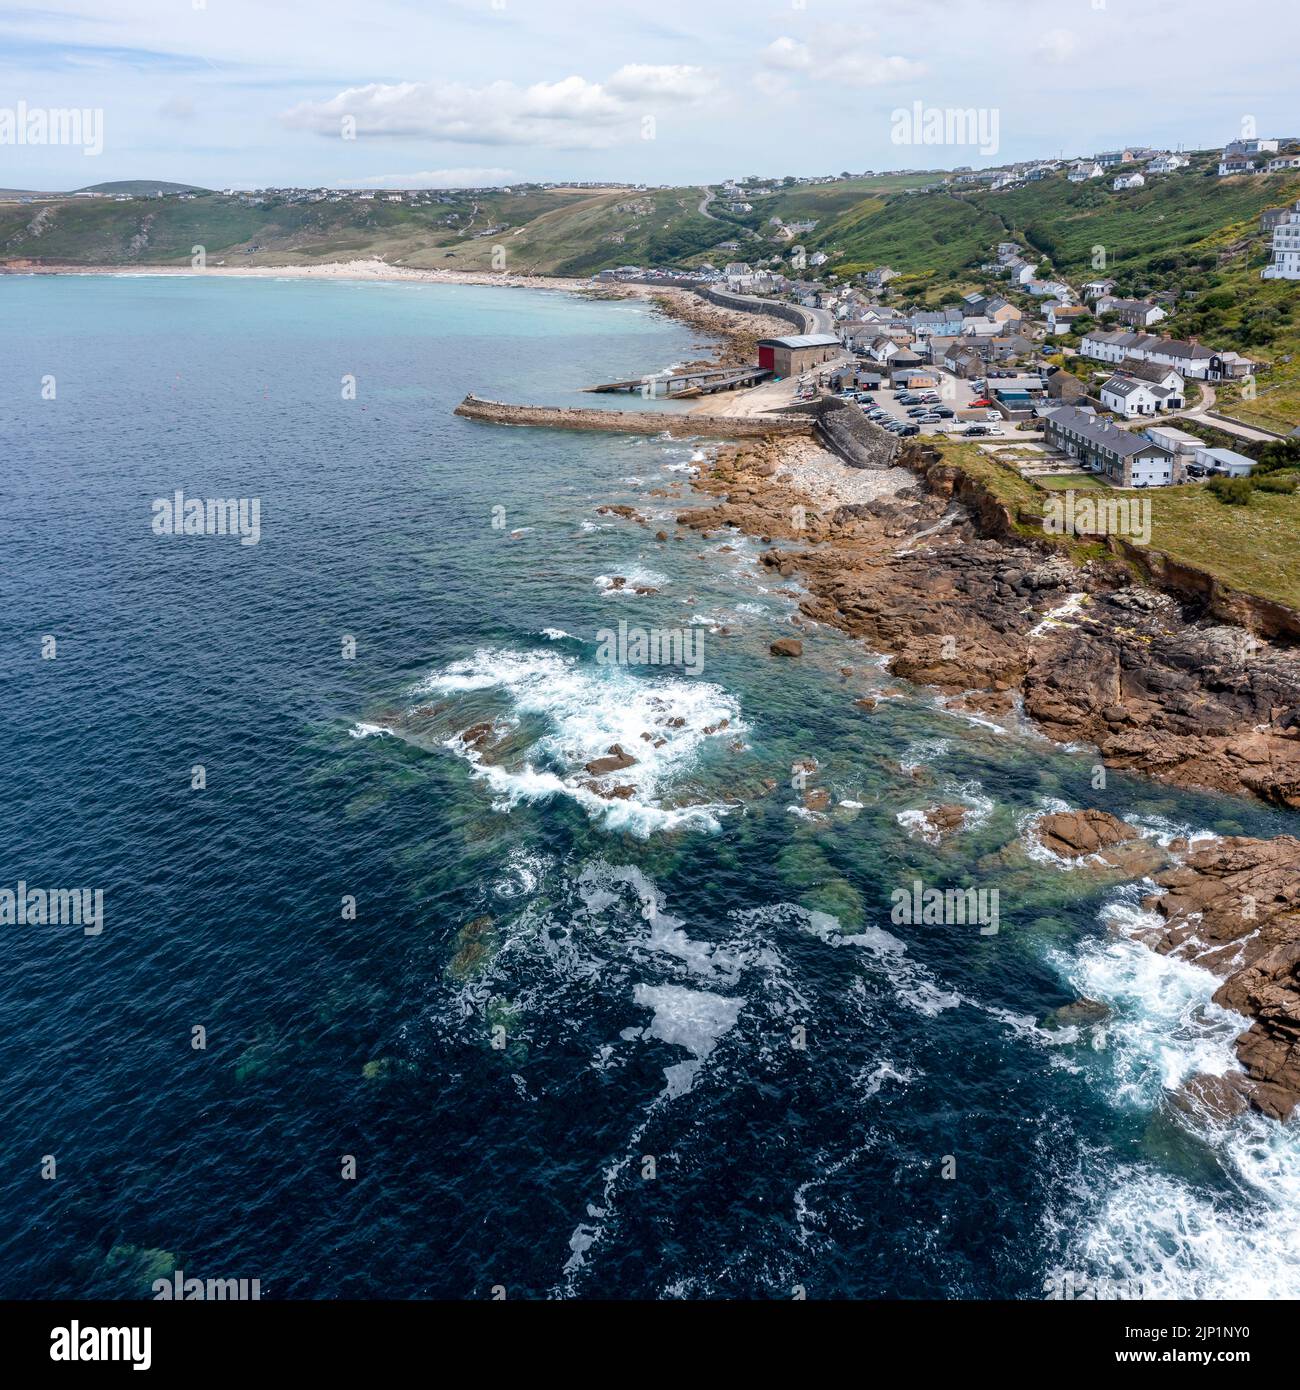 sennen cove cornwall showing rocky shore beach village and lifeboat station elevated view square format Stock Photo